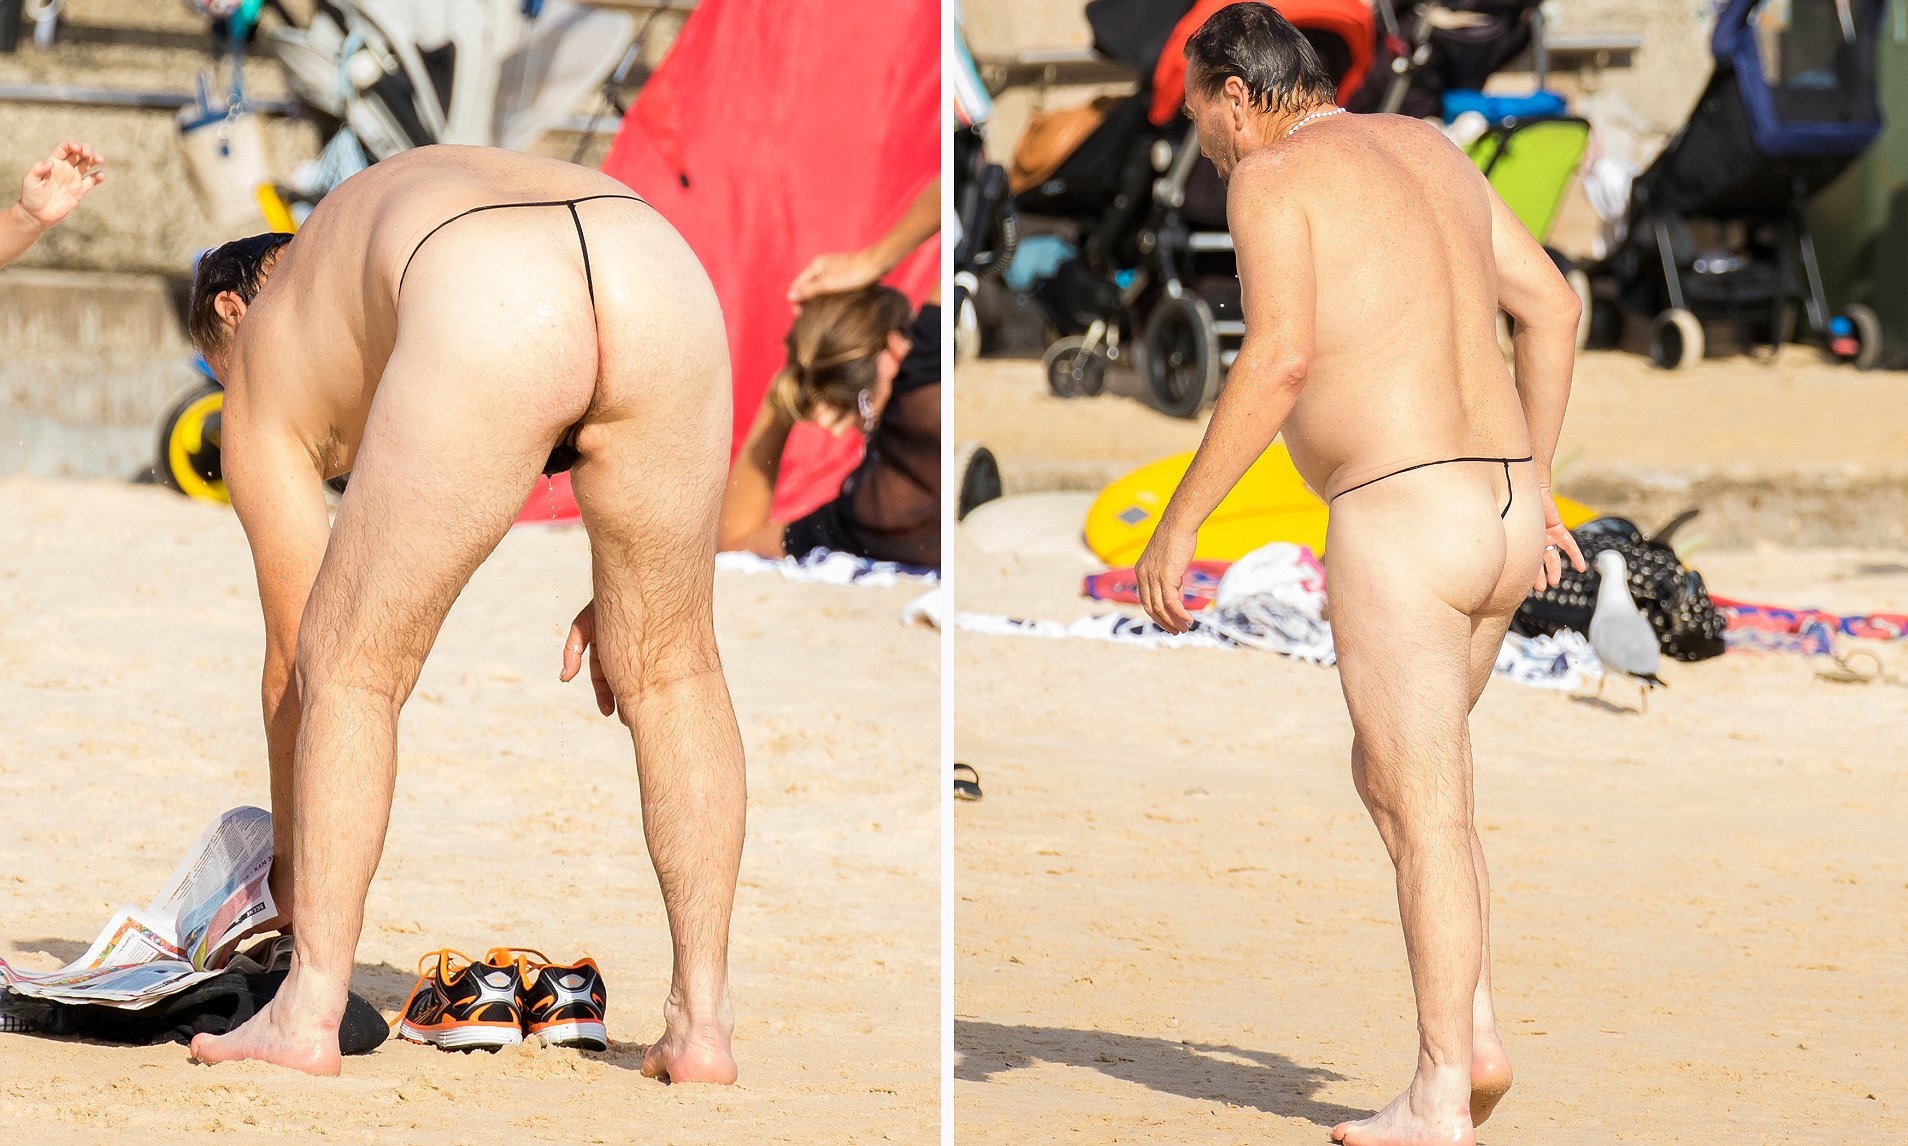 alberto siri recommends Men In Thongs On The Beach